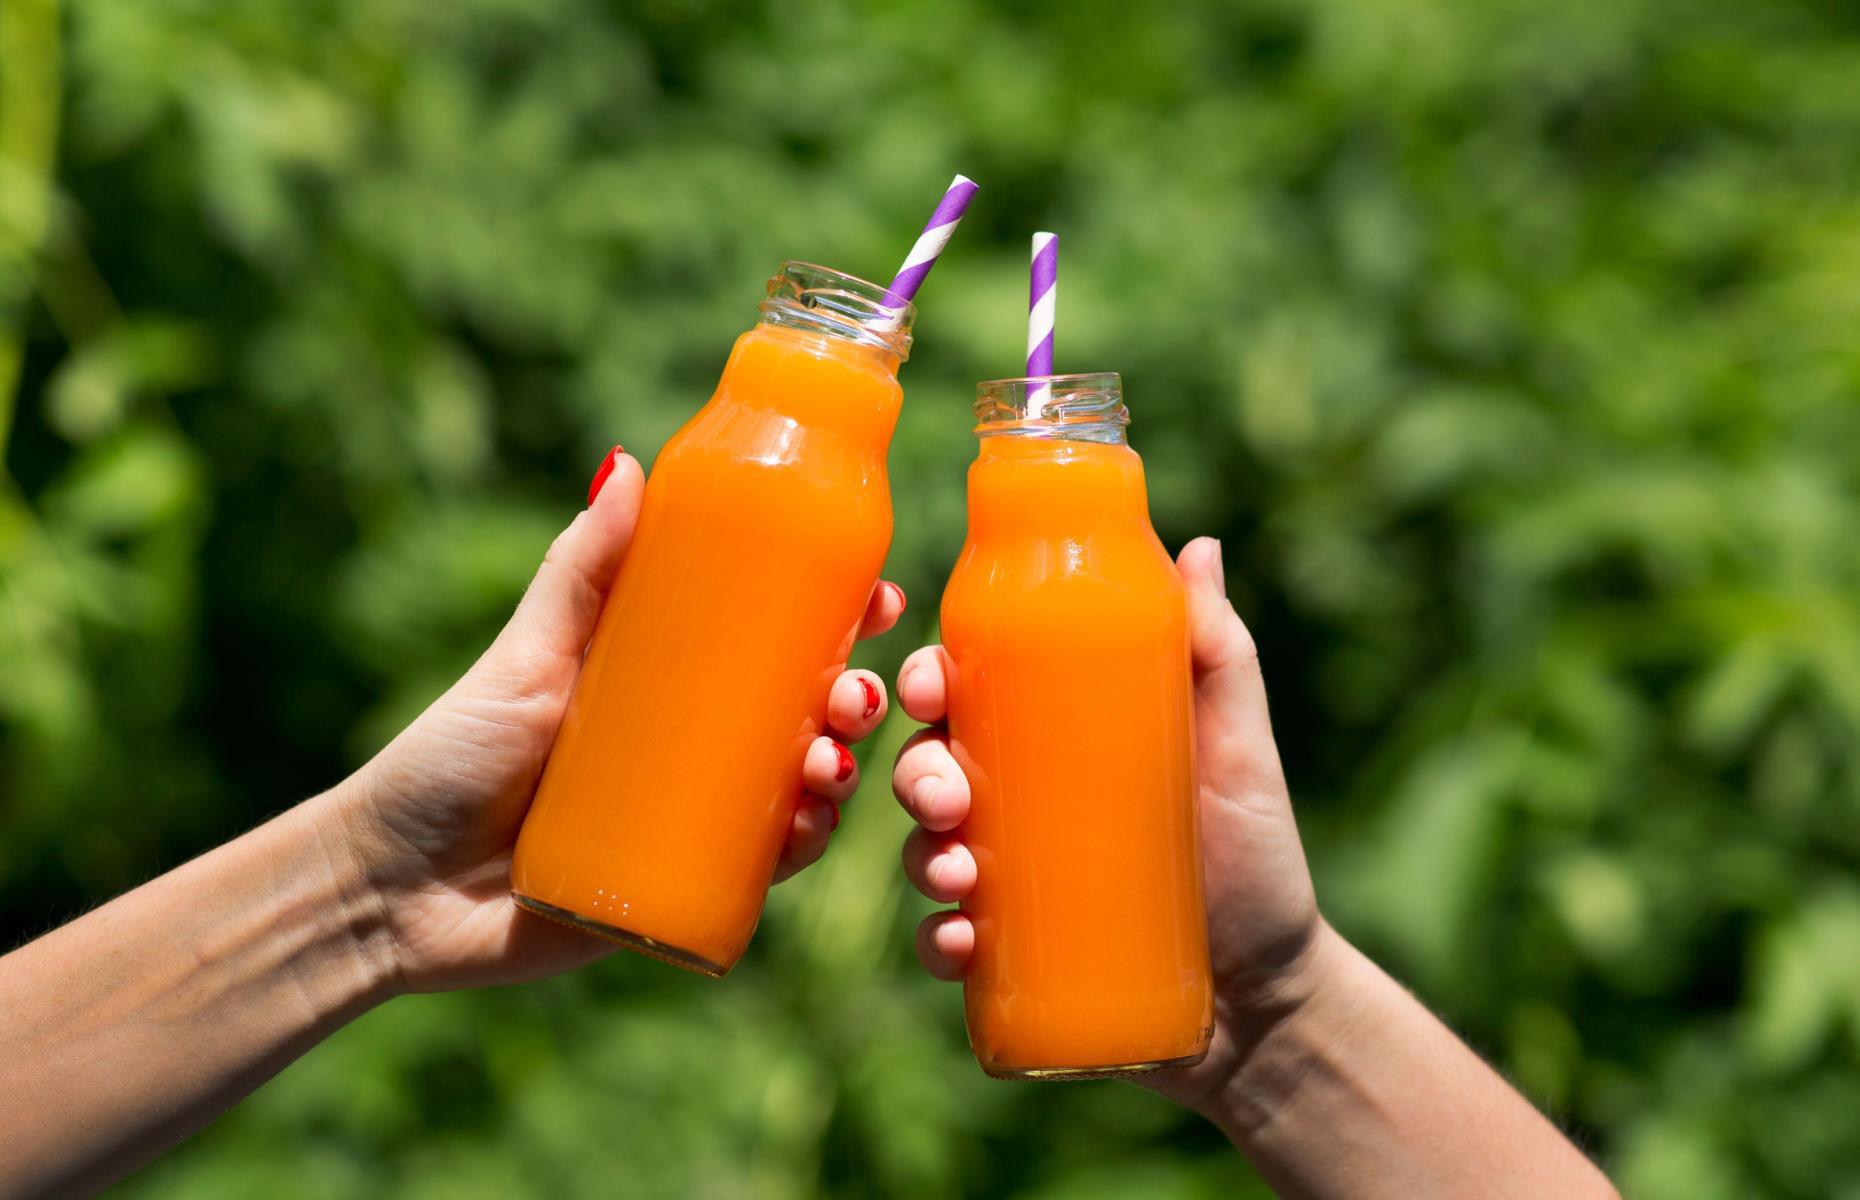 <p>There's a reason why health blogs encourage us to sip fruit juices through a straw. Allowing sugary foods – or even worse, acidic high fructose or glucose drinks – around our teeth is bad news for our tooth enamel. It's all down to the impact sugars have on the oral bacteria that live in plaque on our teeth; these bacteria feast on sugars, releasing acids that dissolve our teeth's hard enamel surface, exposing the softer dentine underneath.</p>